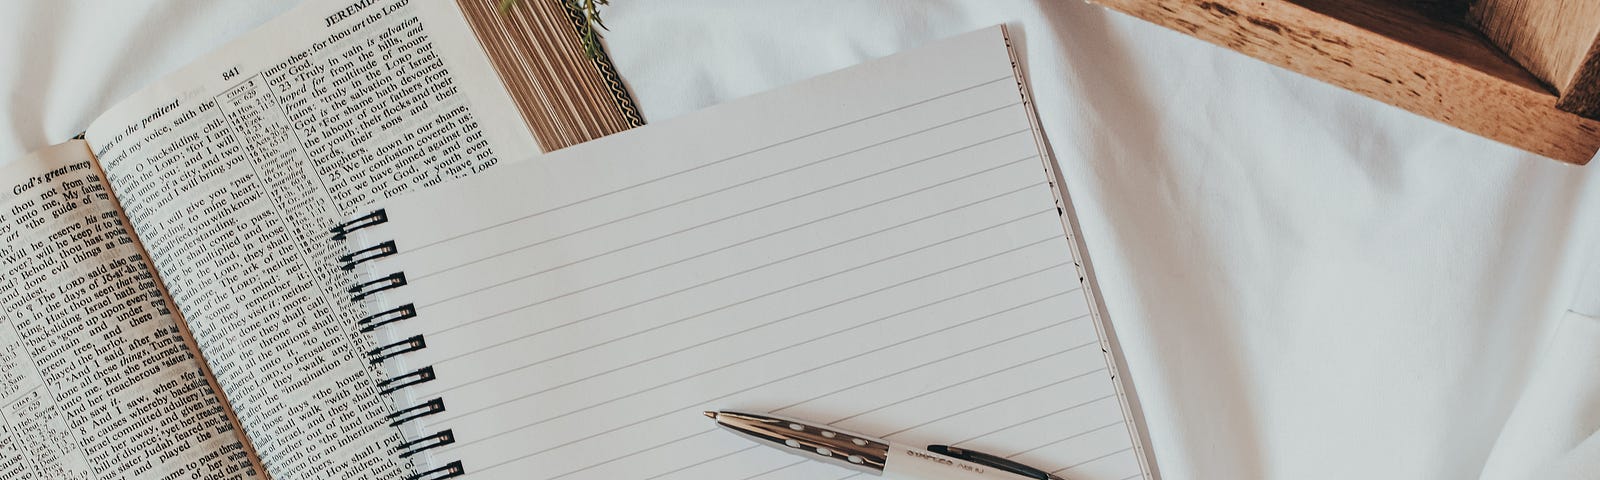 An instagram-worthy photo of a notebook. A beautiful pen rests on the surface of the lined page. Next to it, a book with tiny text rests open on the mattress of the bed, with a comfortable blanket draped around. Someone is taking notes for class.